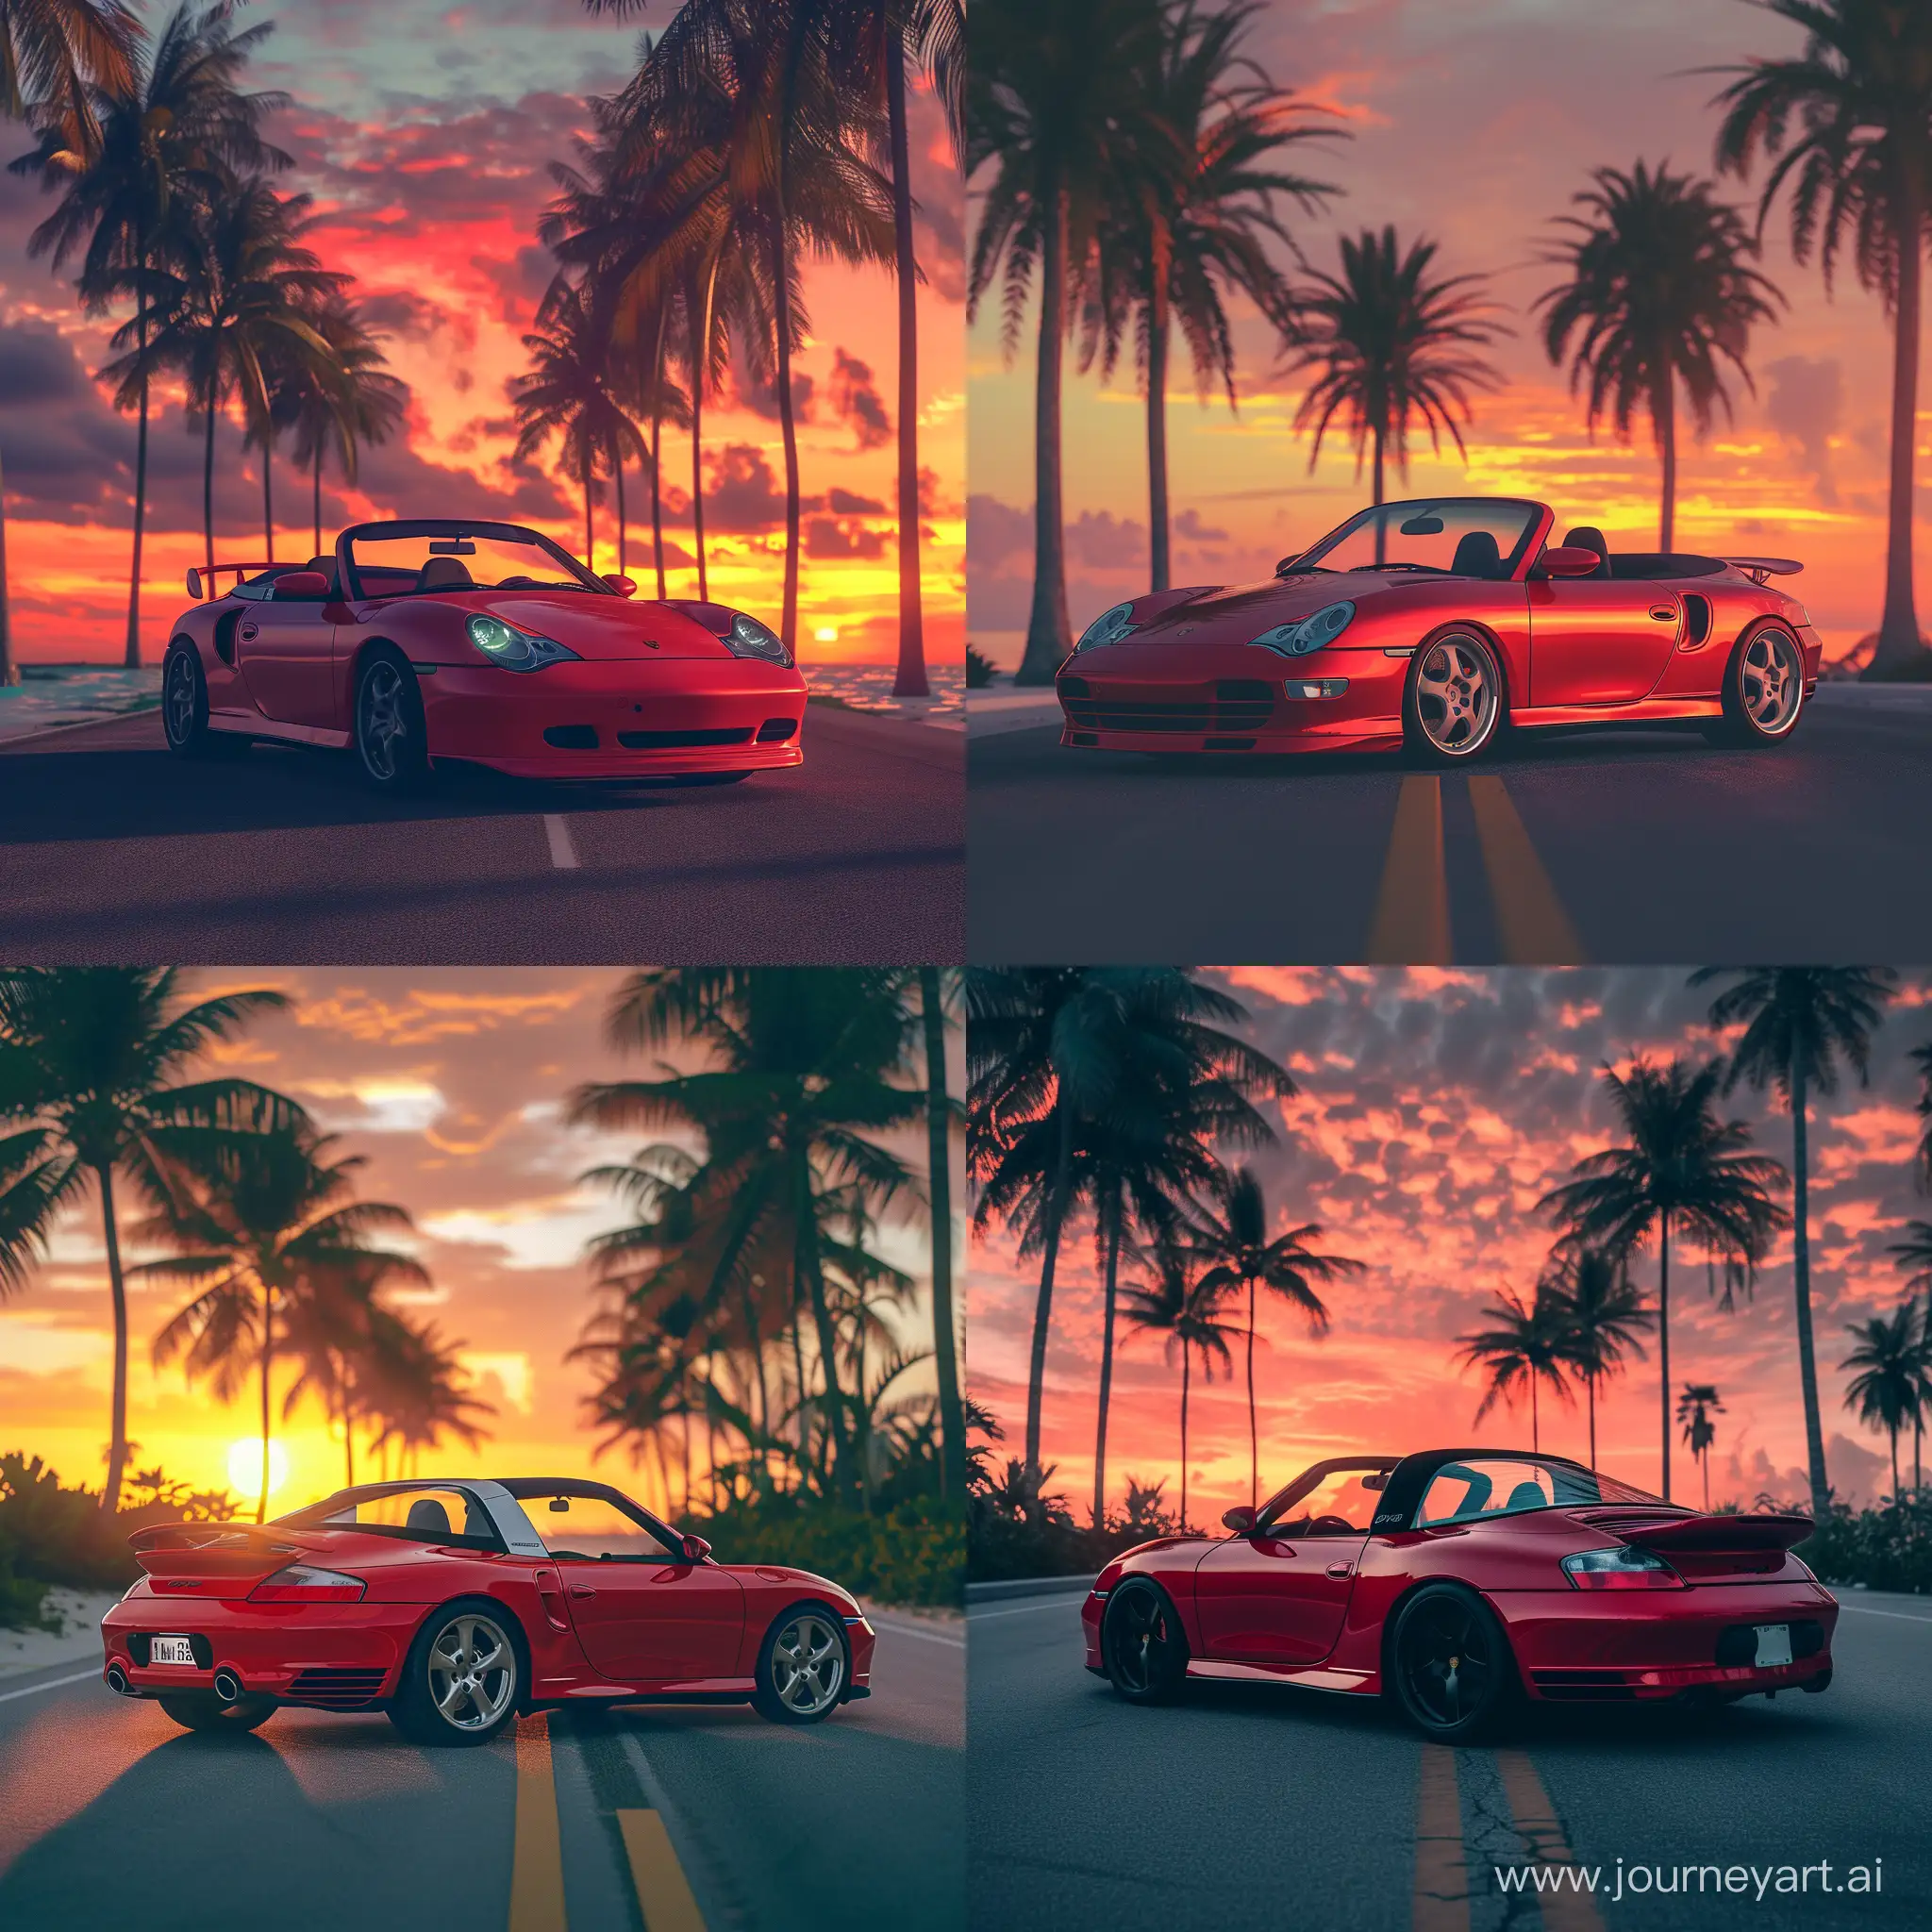 Realistic-Red-Porsche-996-Targa-Driving-on-Tropical-Sunset-Road